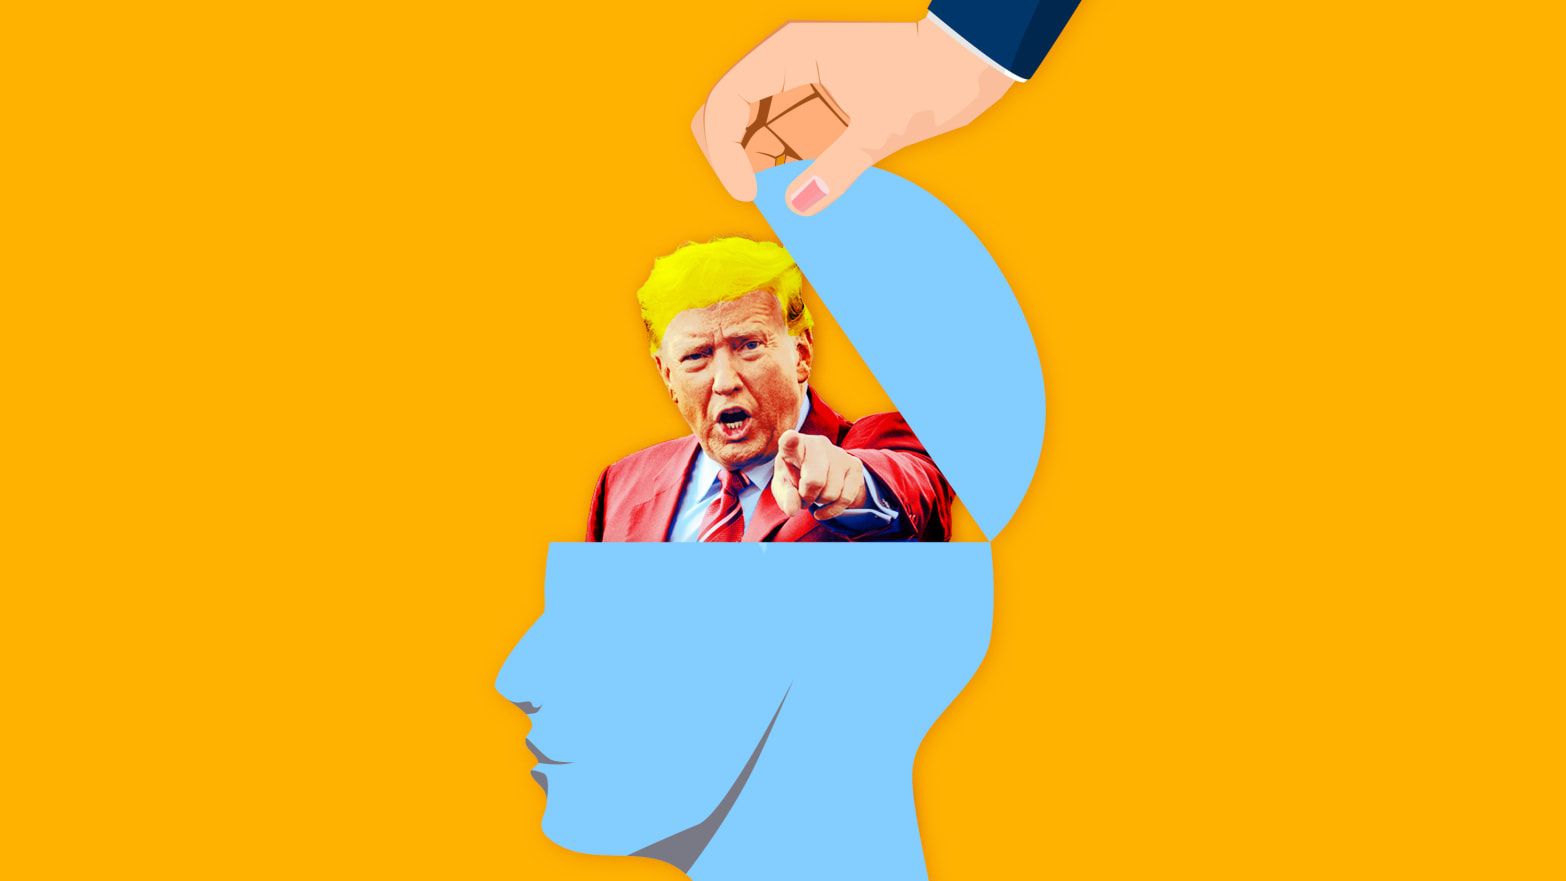 A photo illustration of Donald Trump inside a person's head.